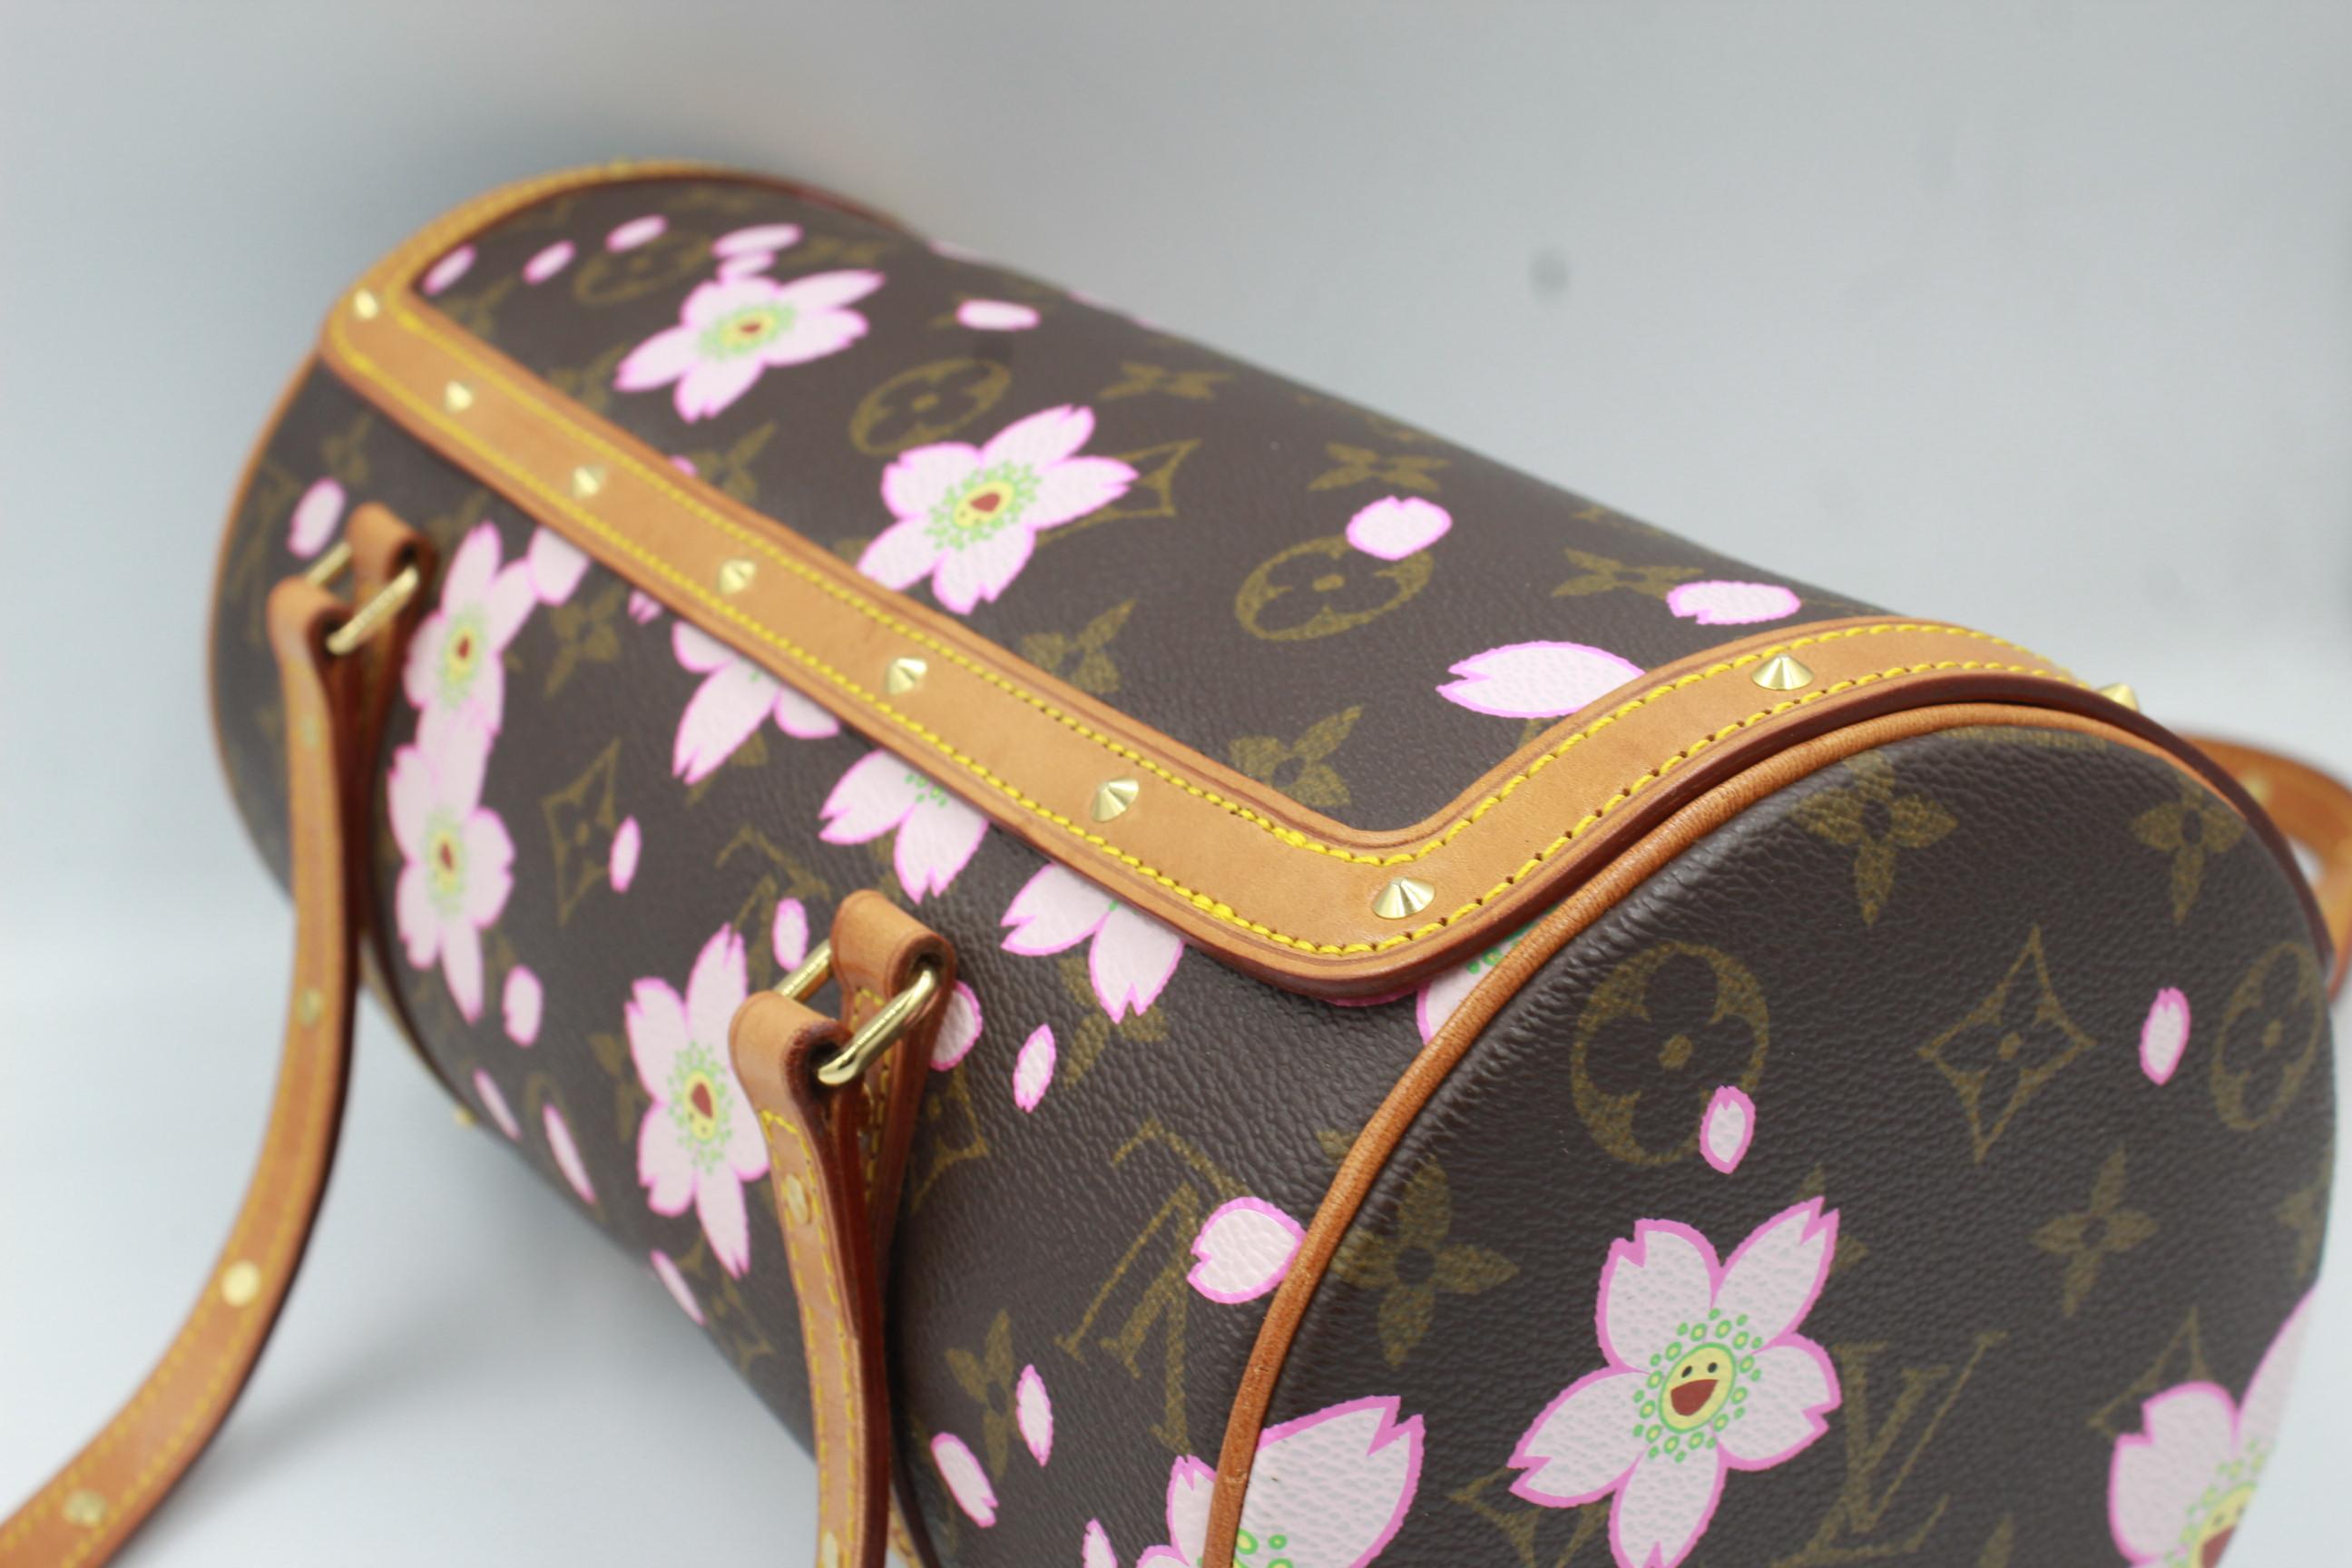 Louis Vuitton Cherry Blossom by Takashi Murakami papillon bag.
Good condition, sold with its padlock and keys.
Rare piece. 
14cm x 27cm x 14cm 